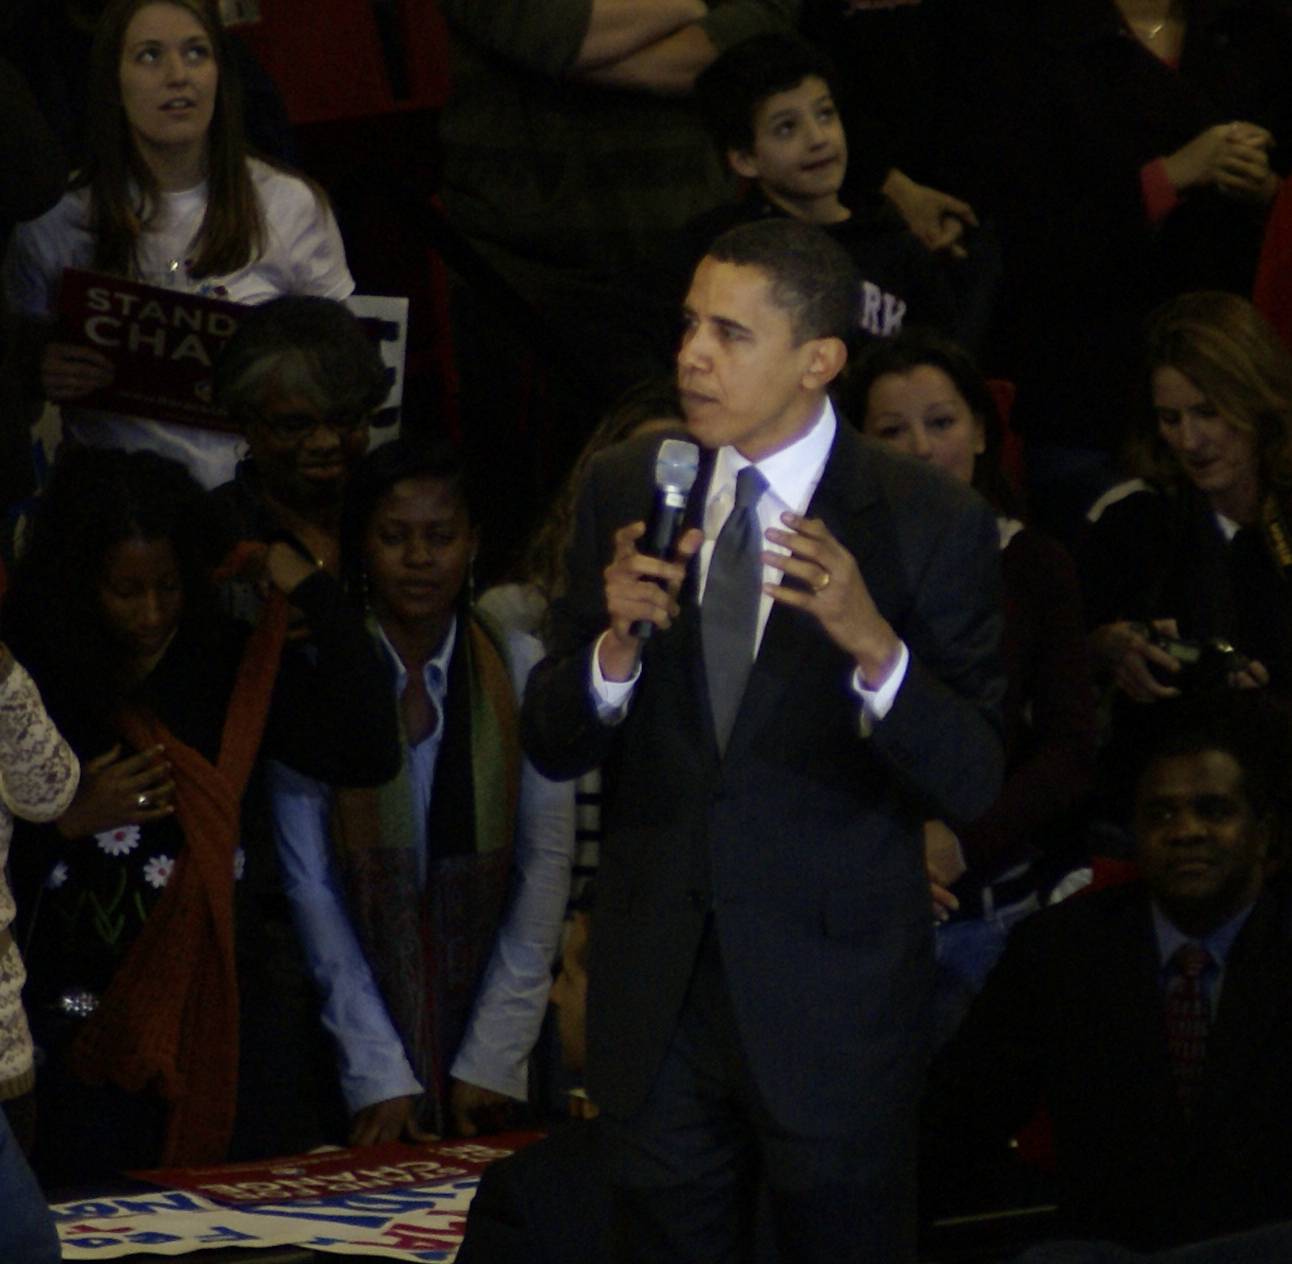 the president is holding a microphone near the audience